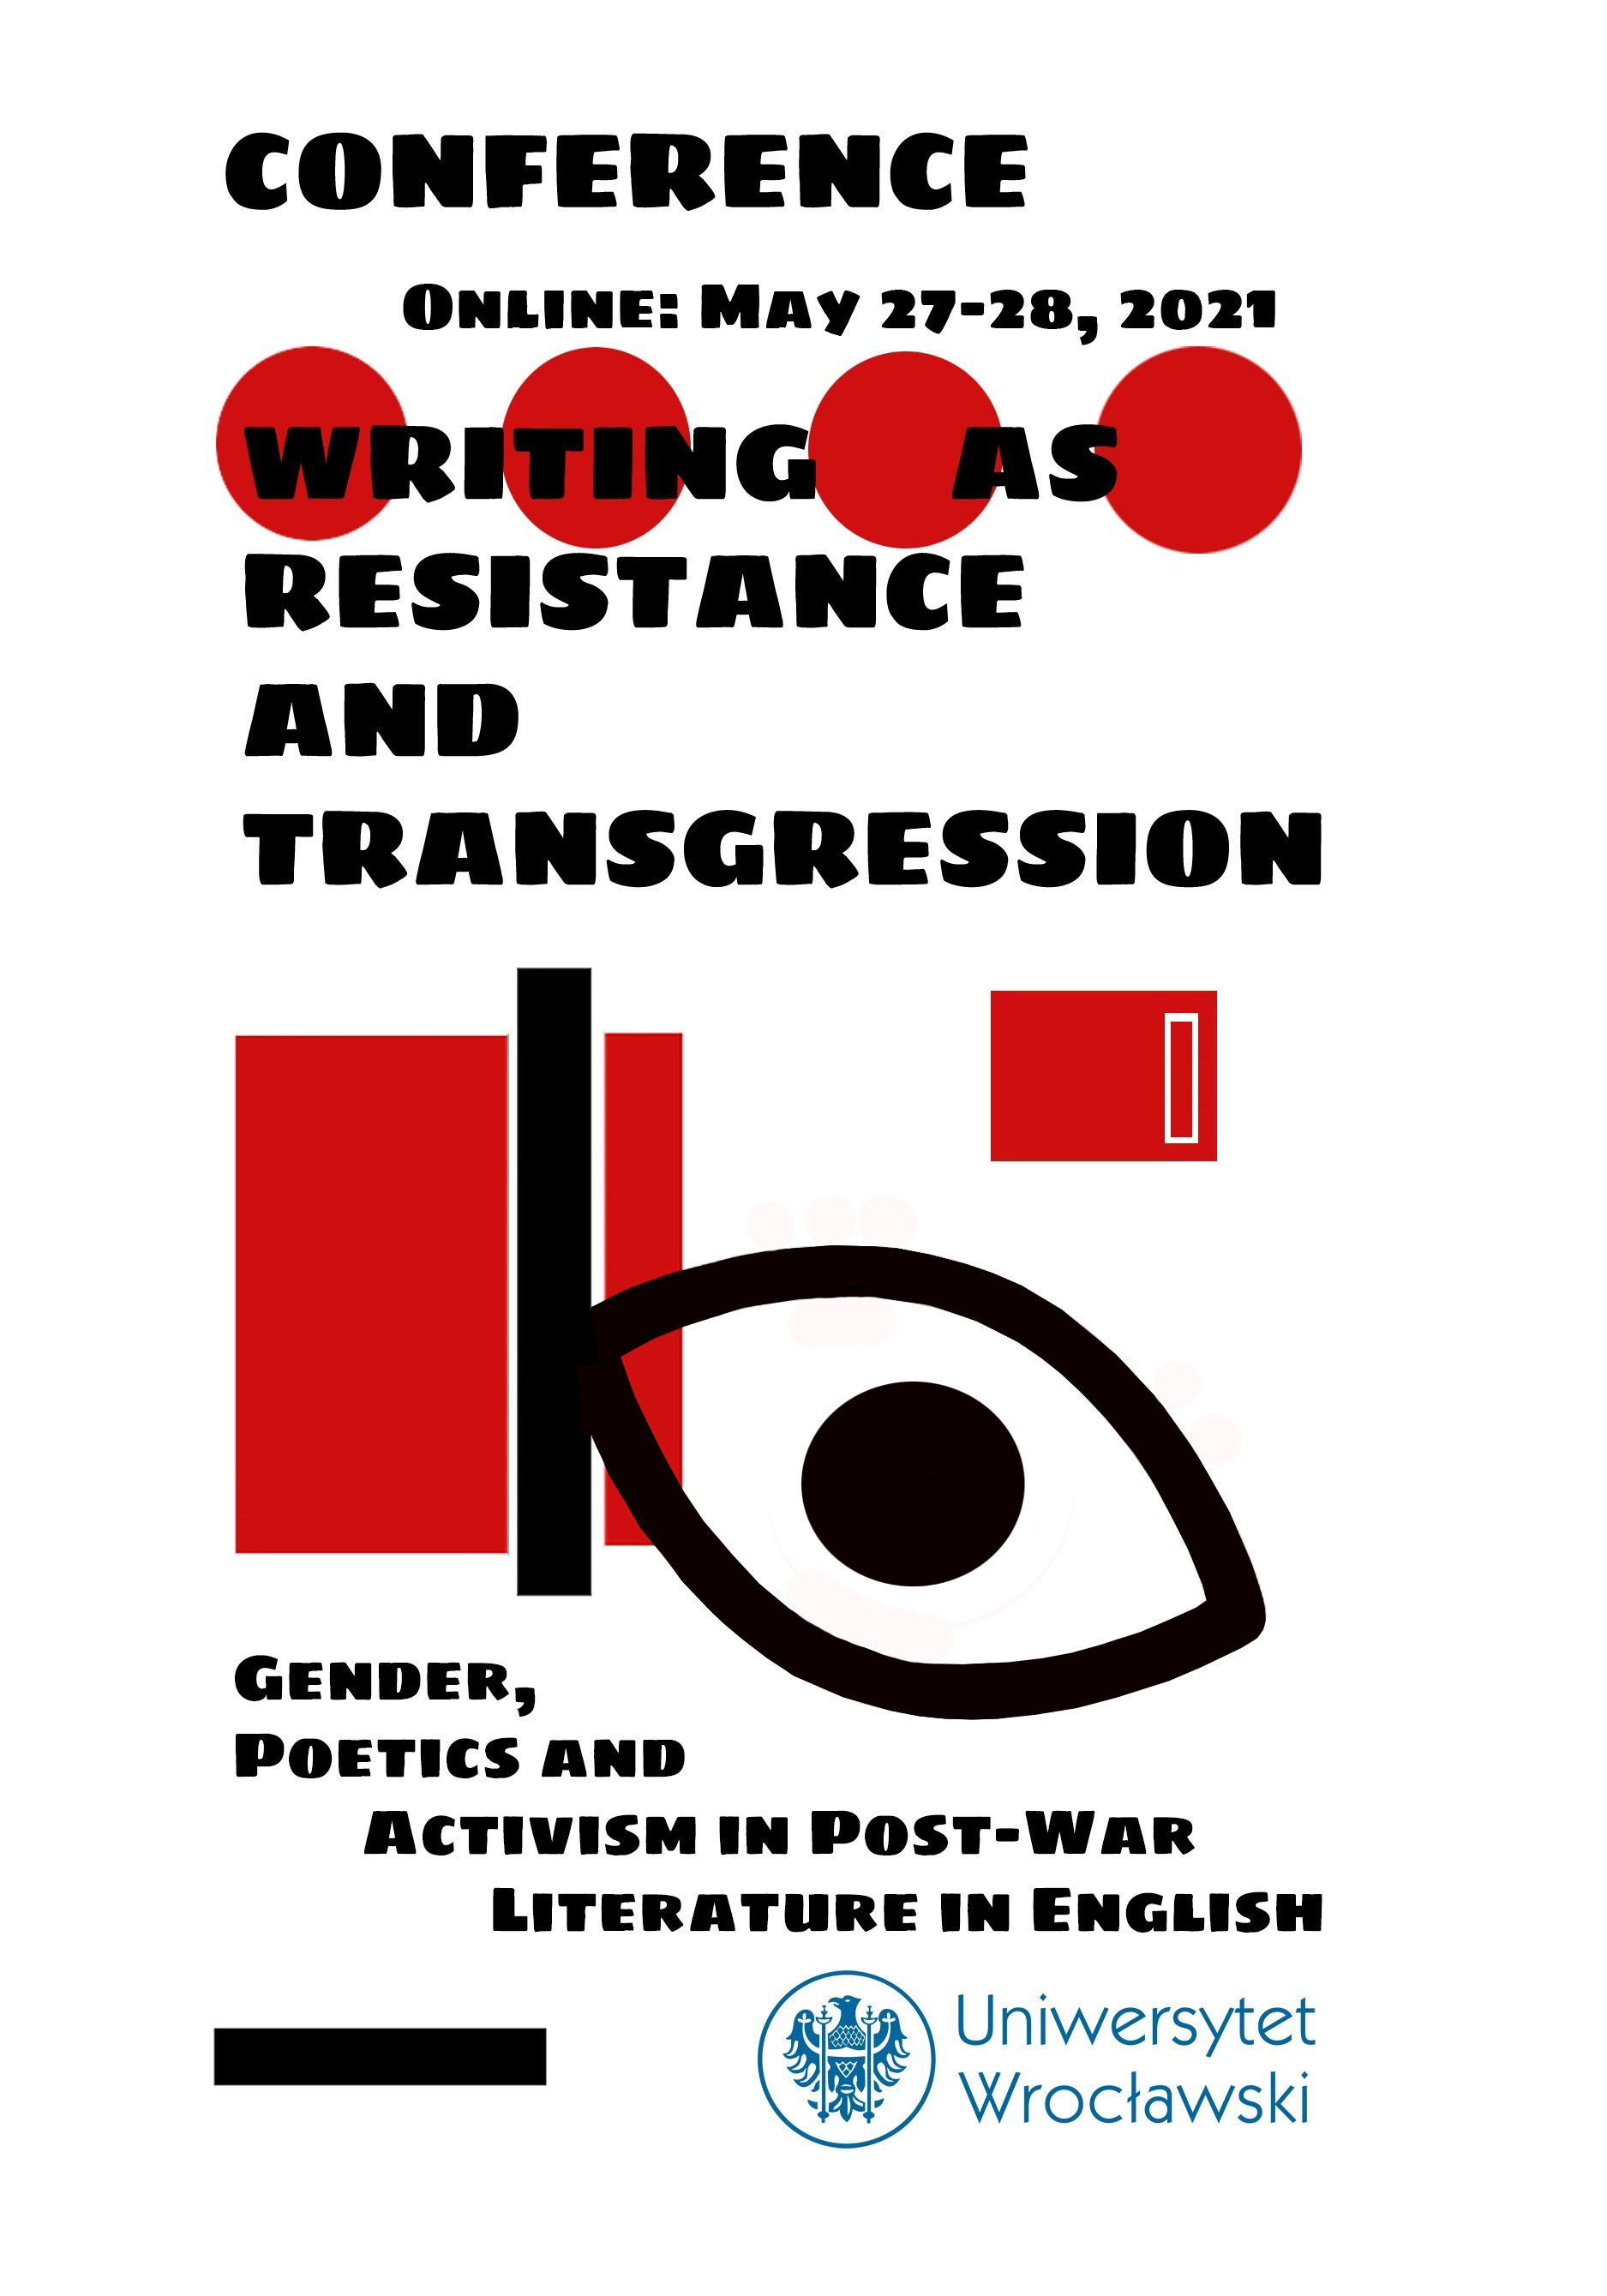 Allegato post-531211-Poster_WritingAsResistance_UWr_IFA_Conference.jpg